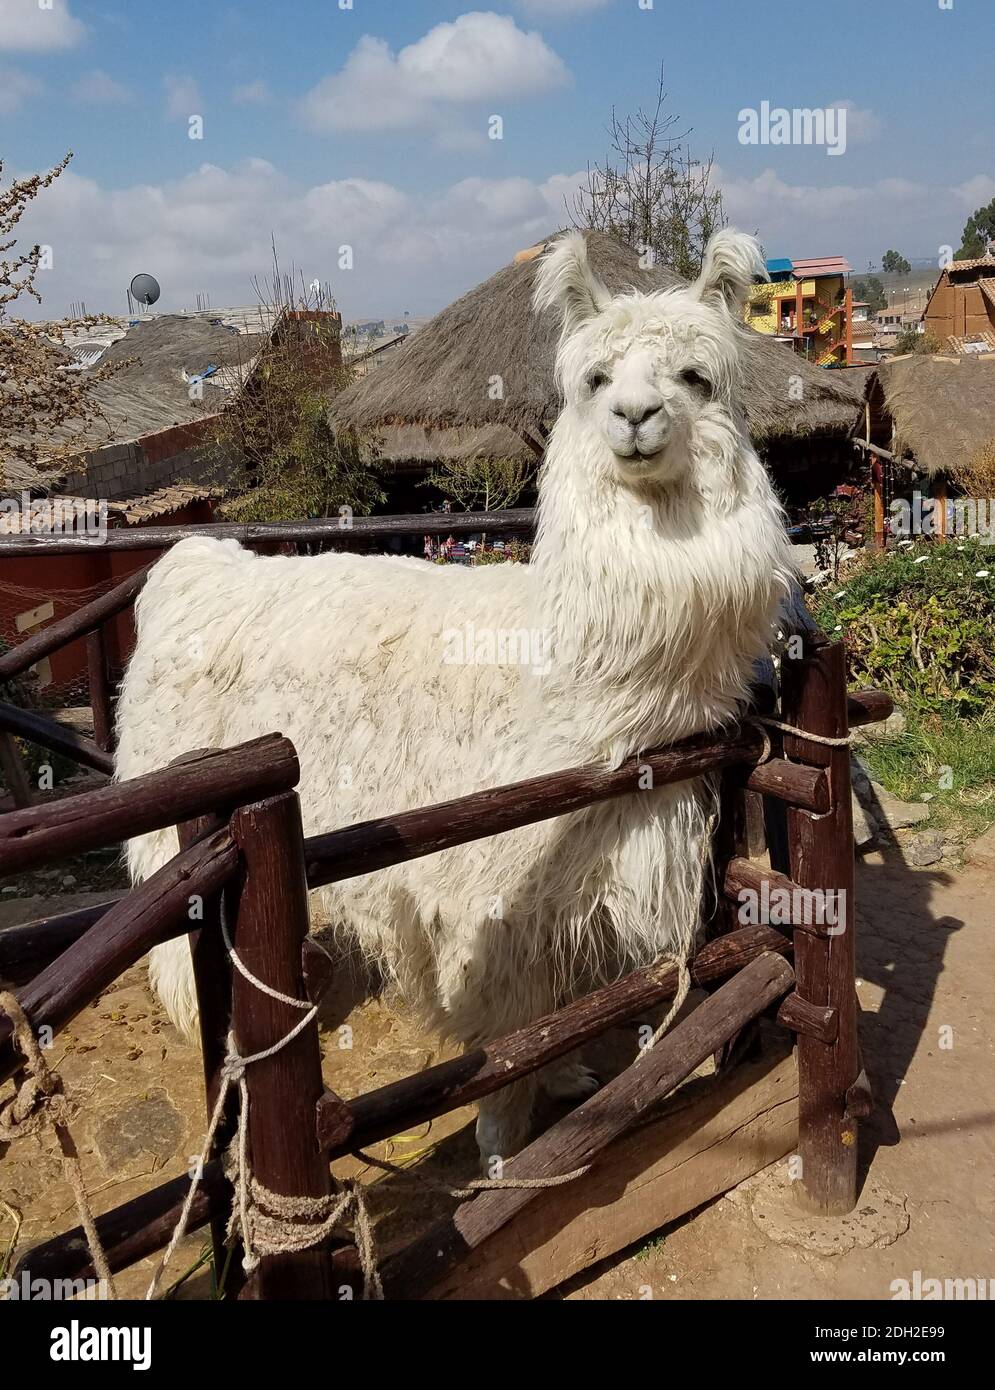 Alpaca in a Peru farm. Alpacas and lamas are domesticated animals from the camel family in South America. Stock Photo